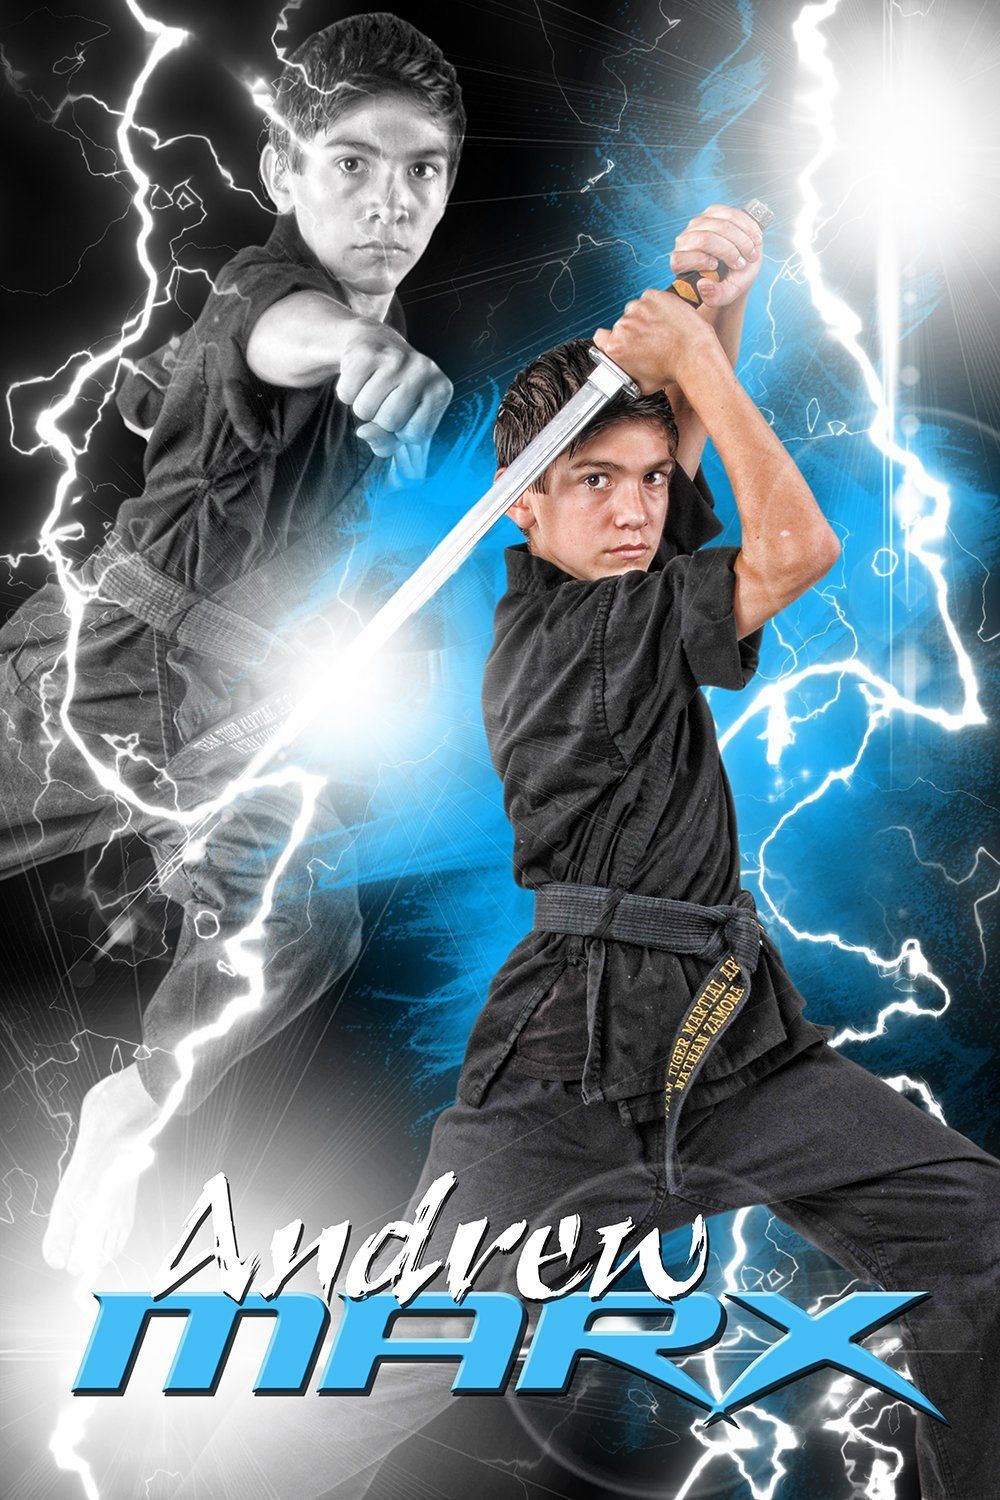 Lightning - Martial Arts Series - Poster/Banner V-Photoshop Template - Photo Solutions